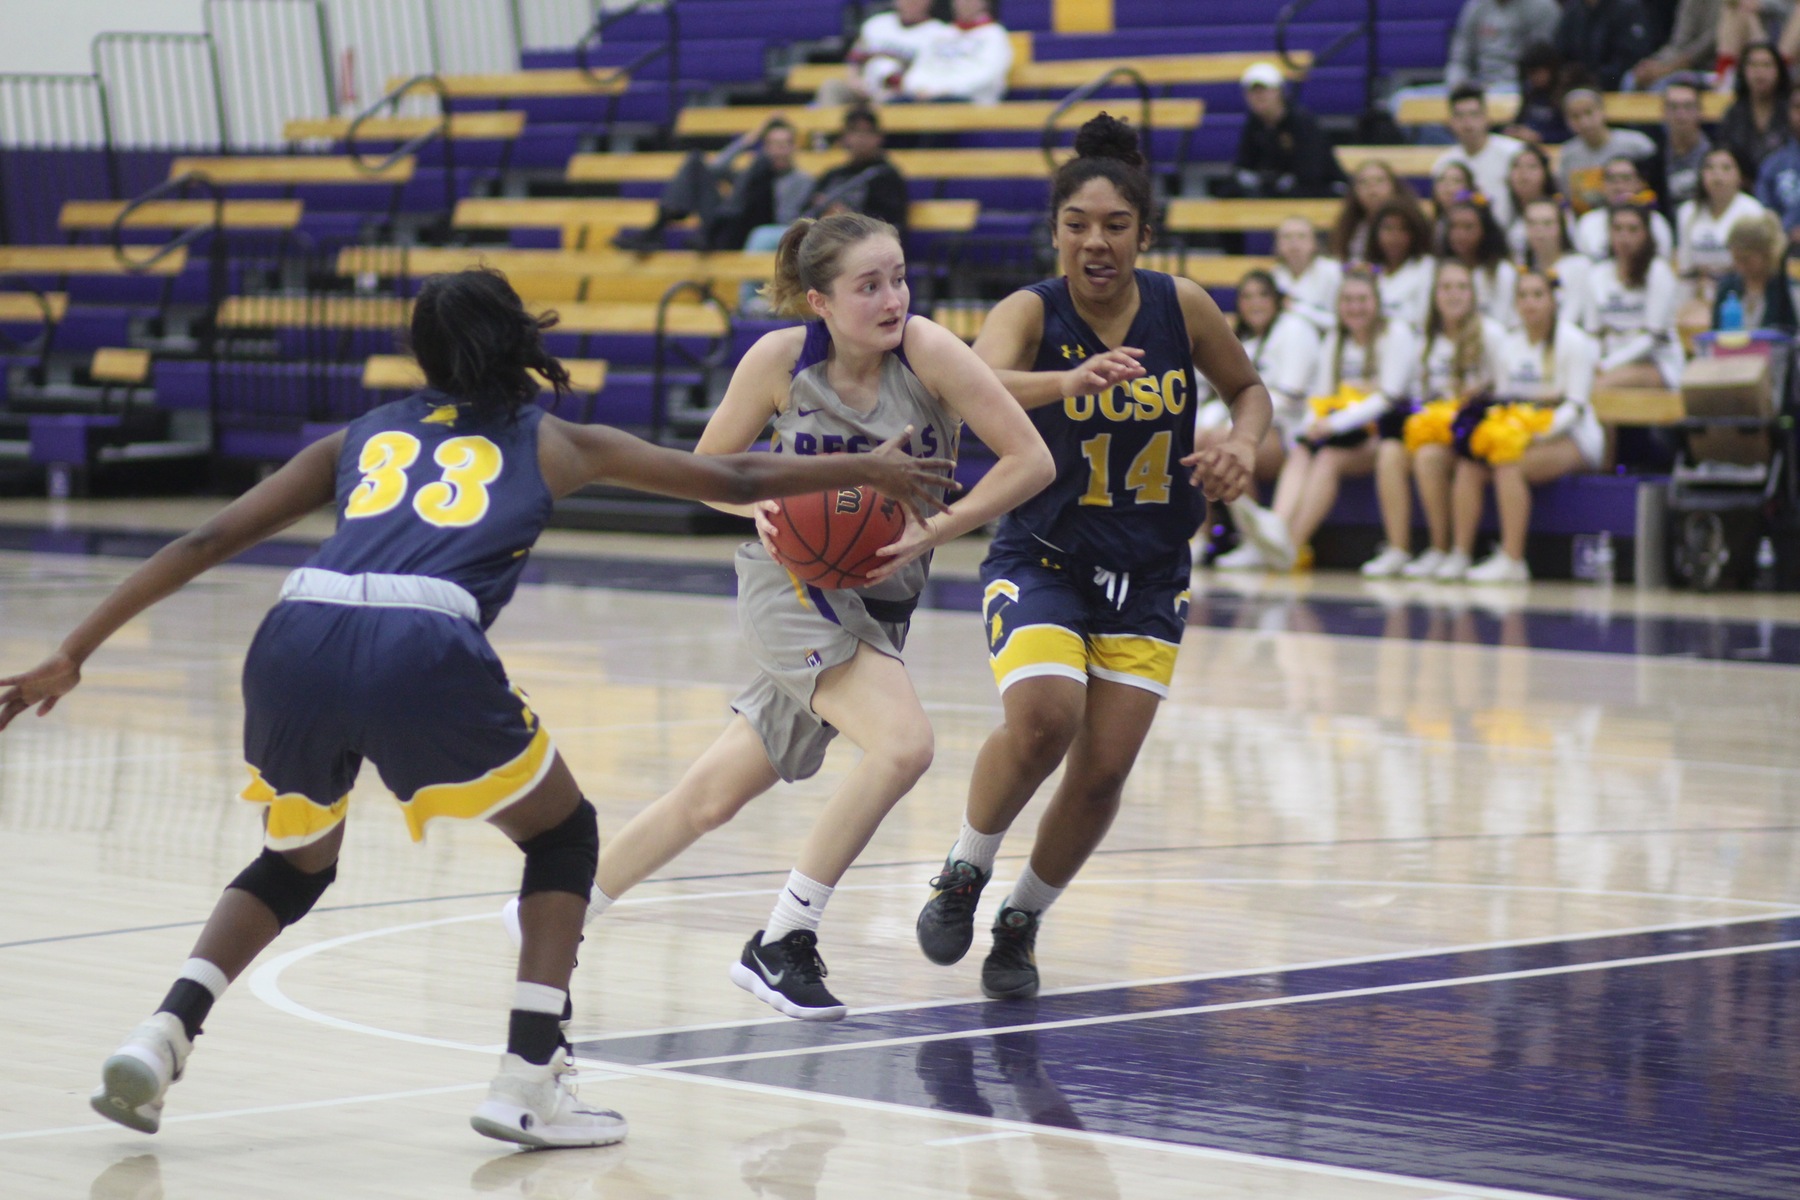 Ruhl Beats the Buzzer to Give Regals 61-58 Win Over Whittier